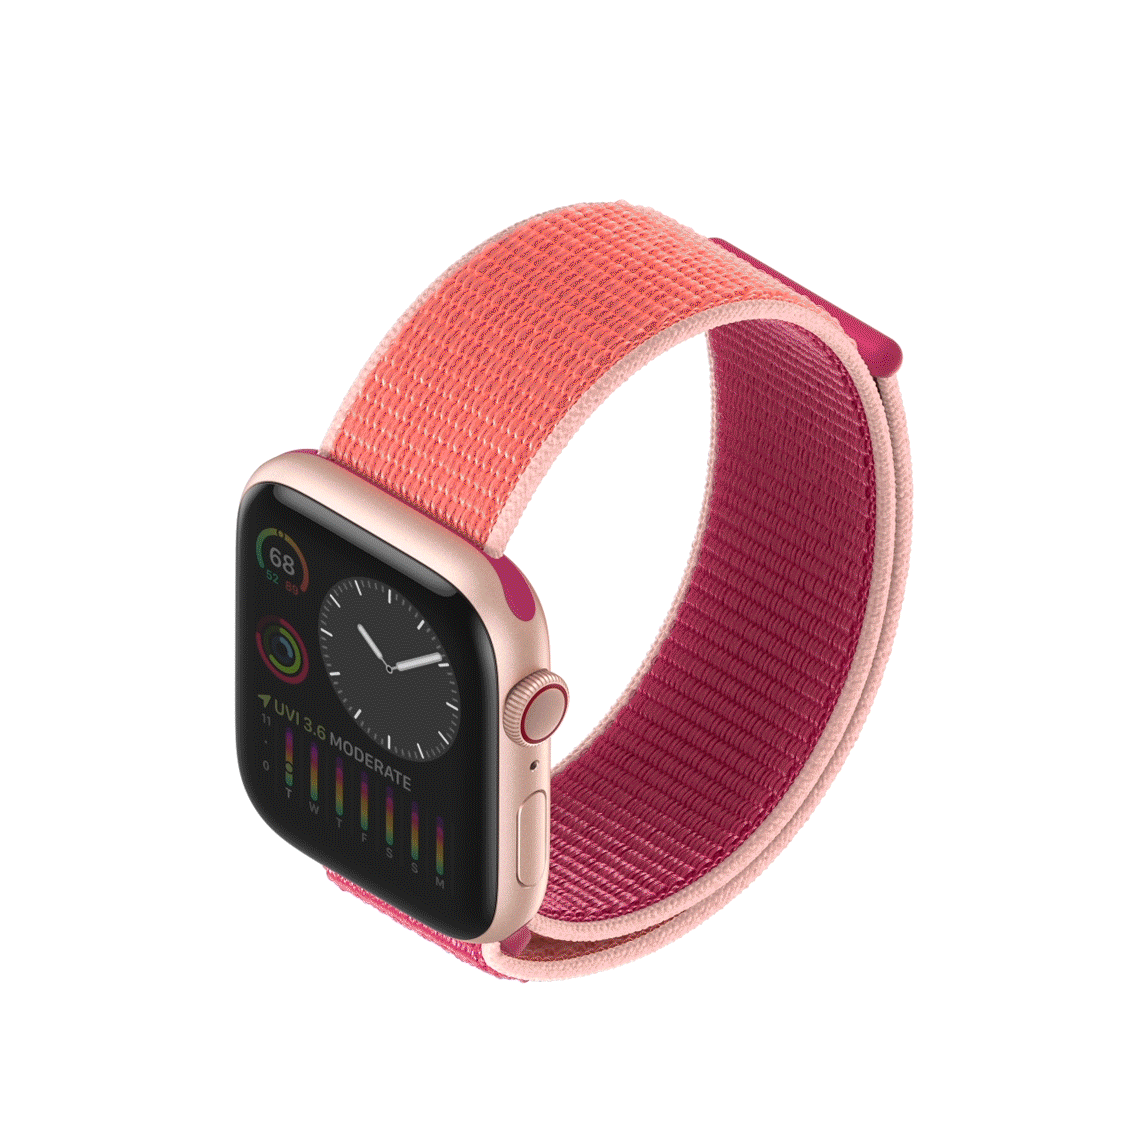 Apple Watch Series 5 comes with Always-On Retina Display, among other things 29